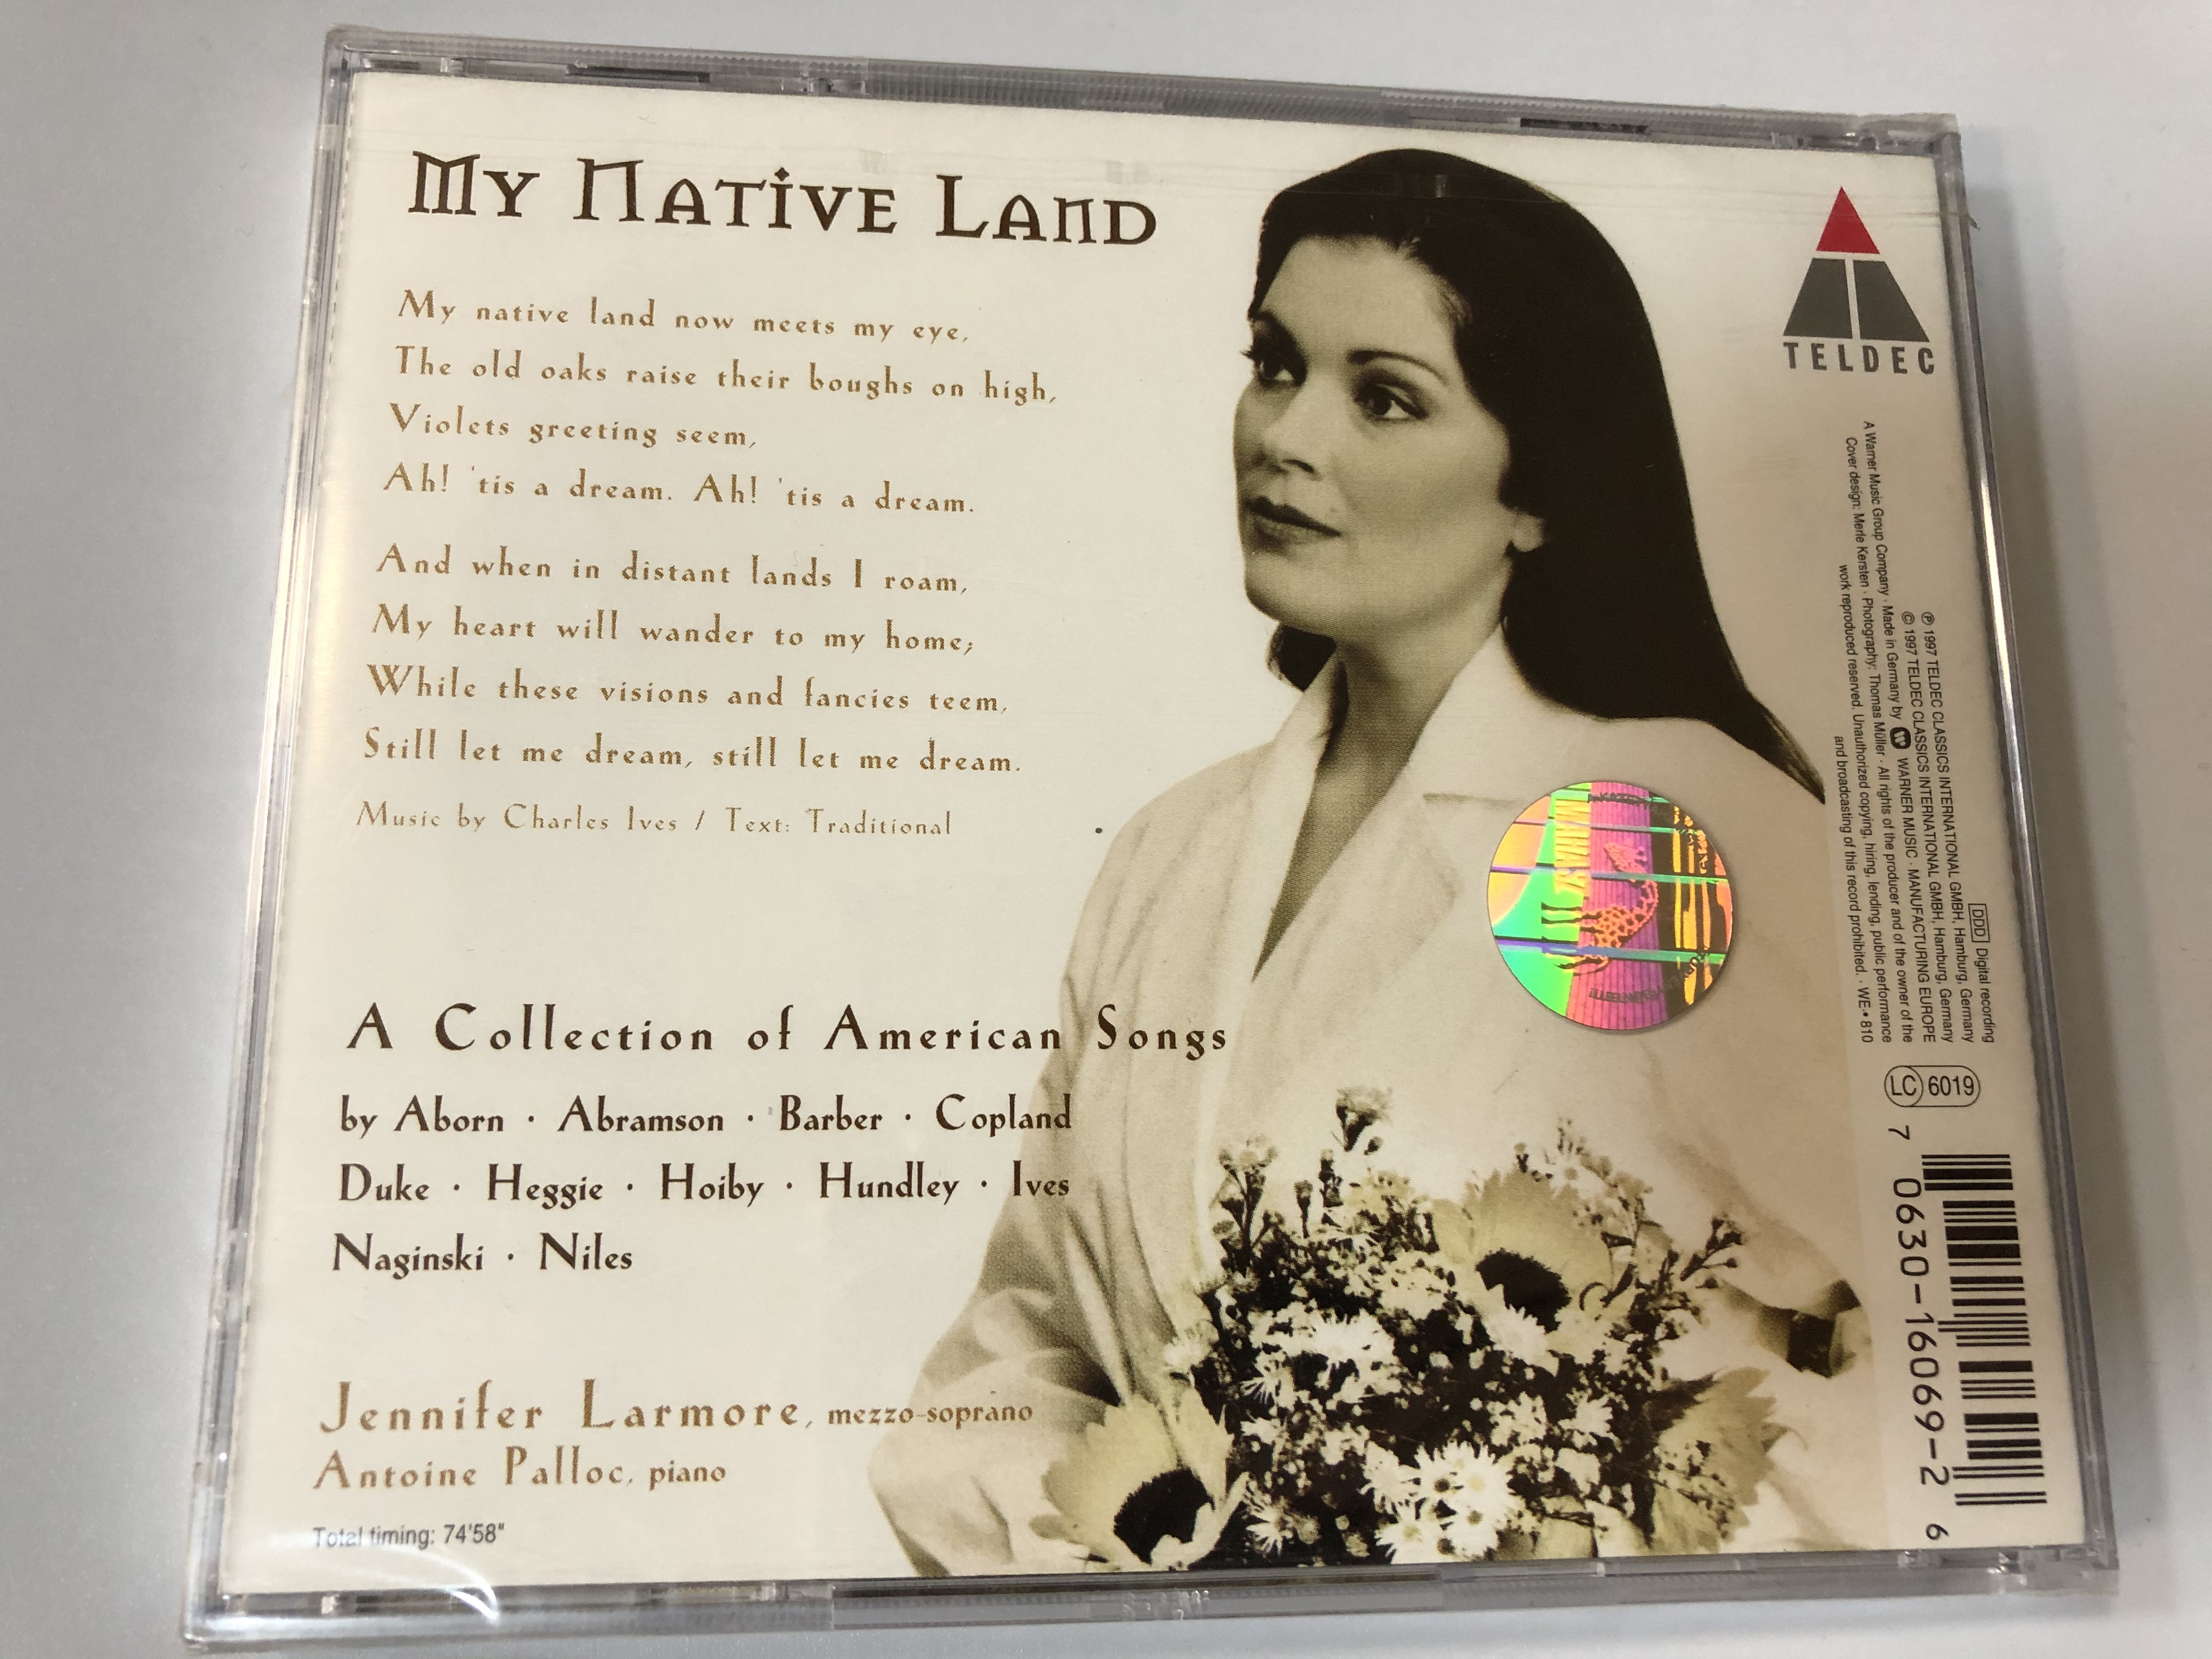 my-native-land-a-collection-of-american-songs-jennifer-larmore-teldec-audio-cd-1997-0630-16069-2-2-.jpg